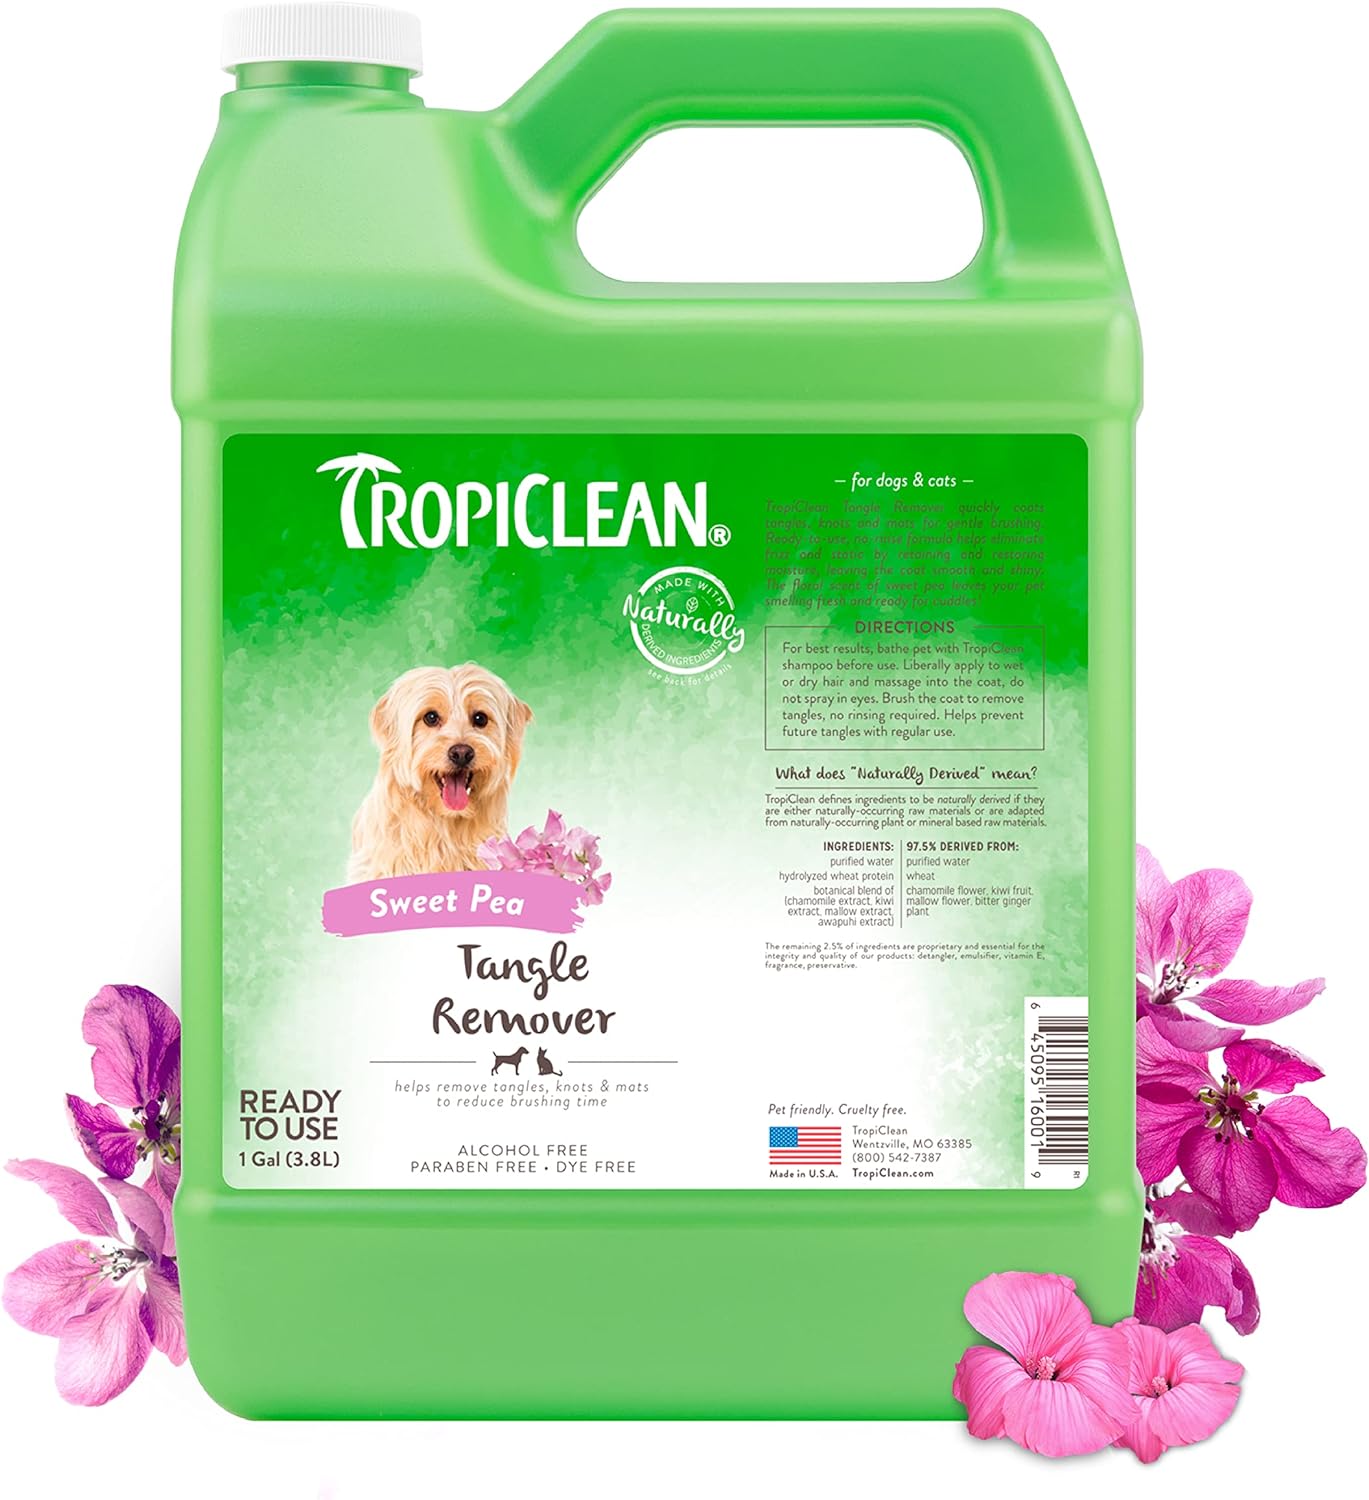 TropiClean Sweet Pea Cat & Dog Detangler Spray Dematting | Dog Conditioner Spray Derived from Natural Ingredients | Made in the USA | 1 Gallon